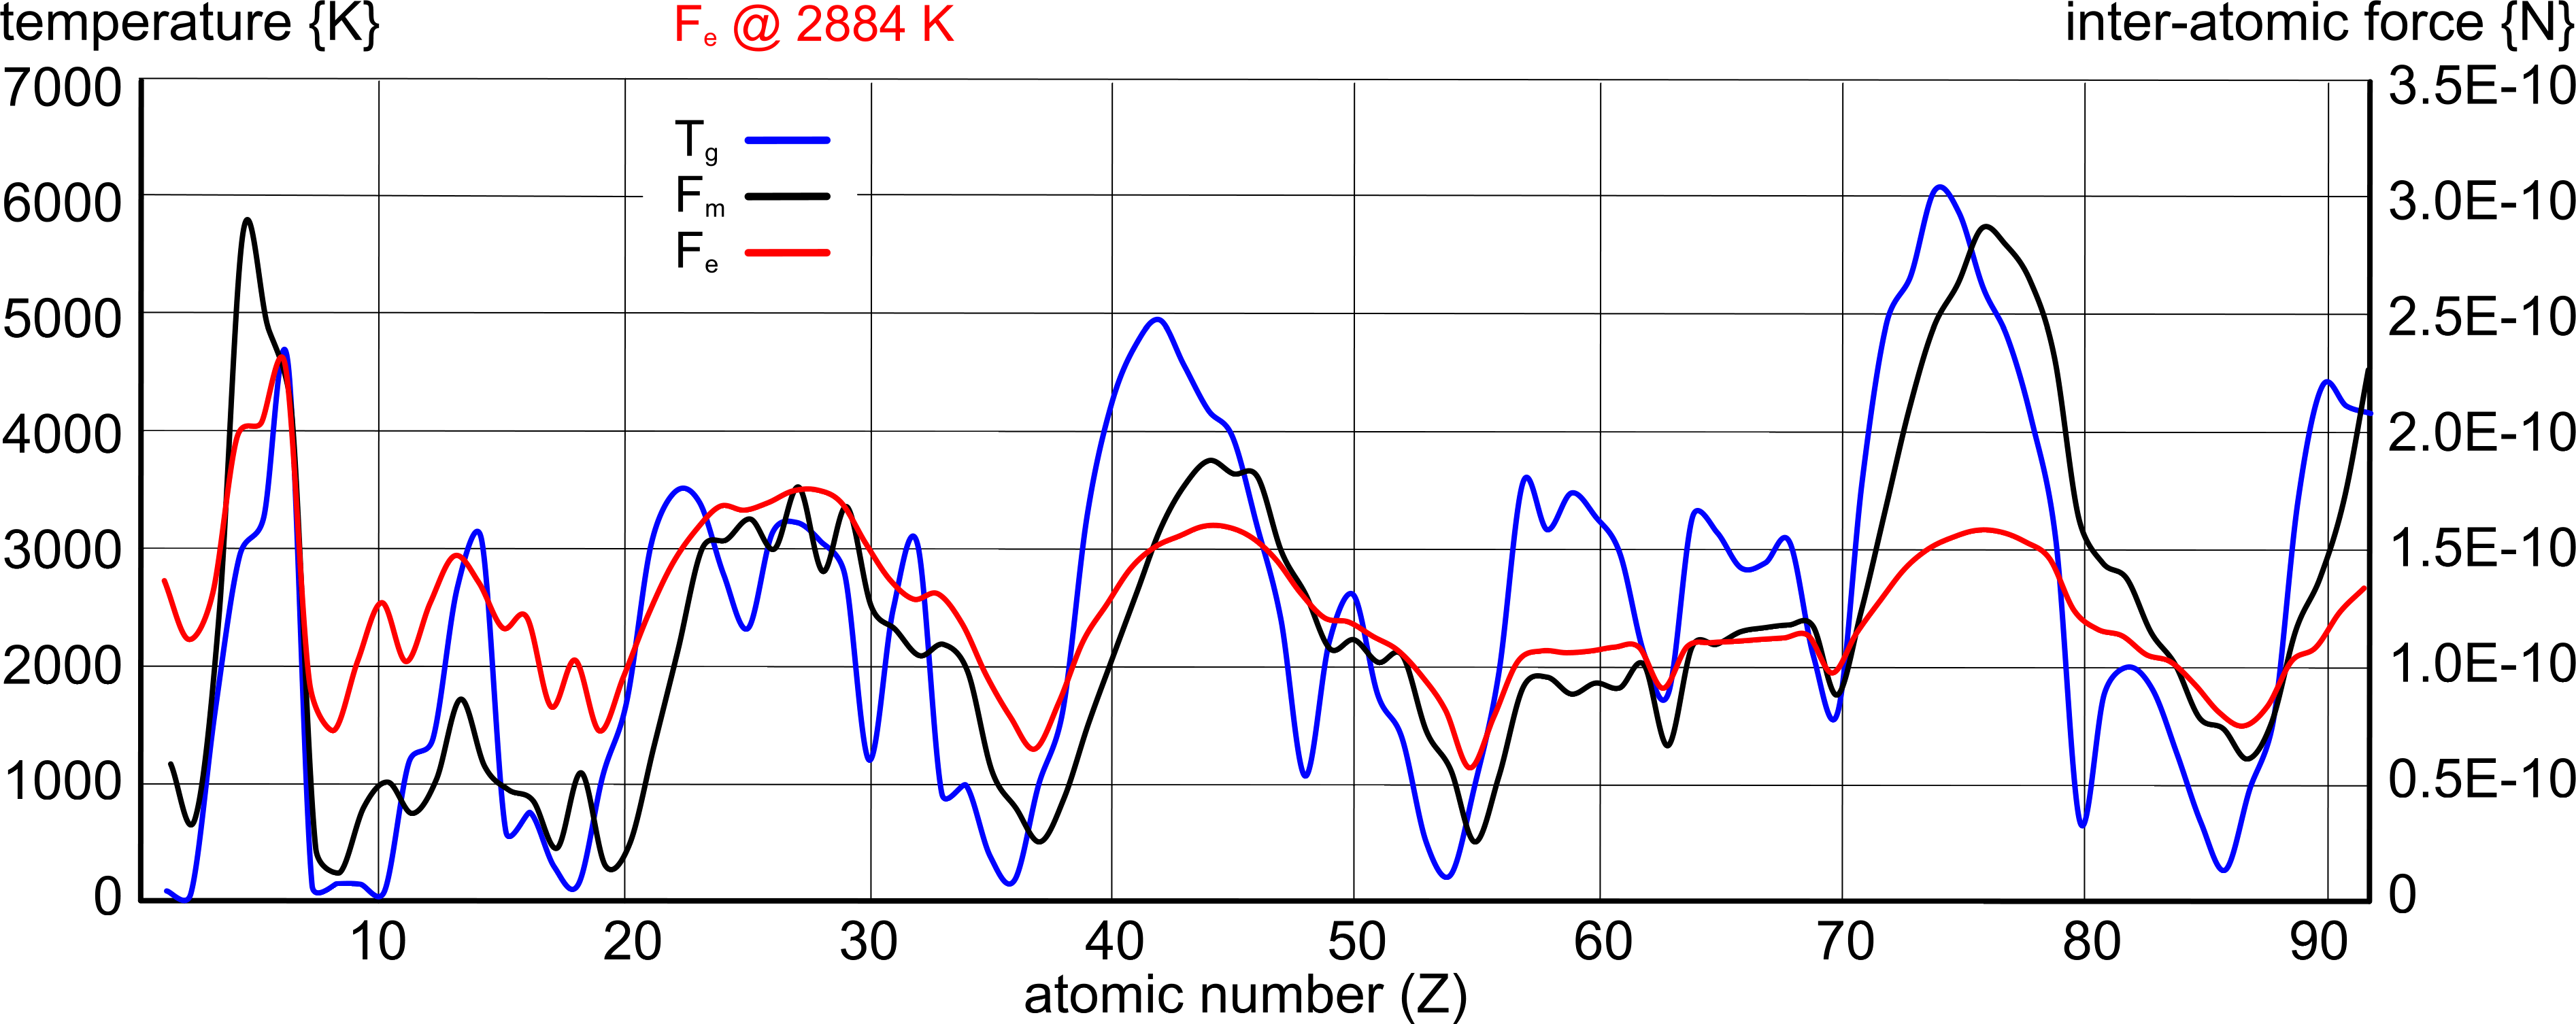 gas transition temperature based upon inter-atomic forces